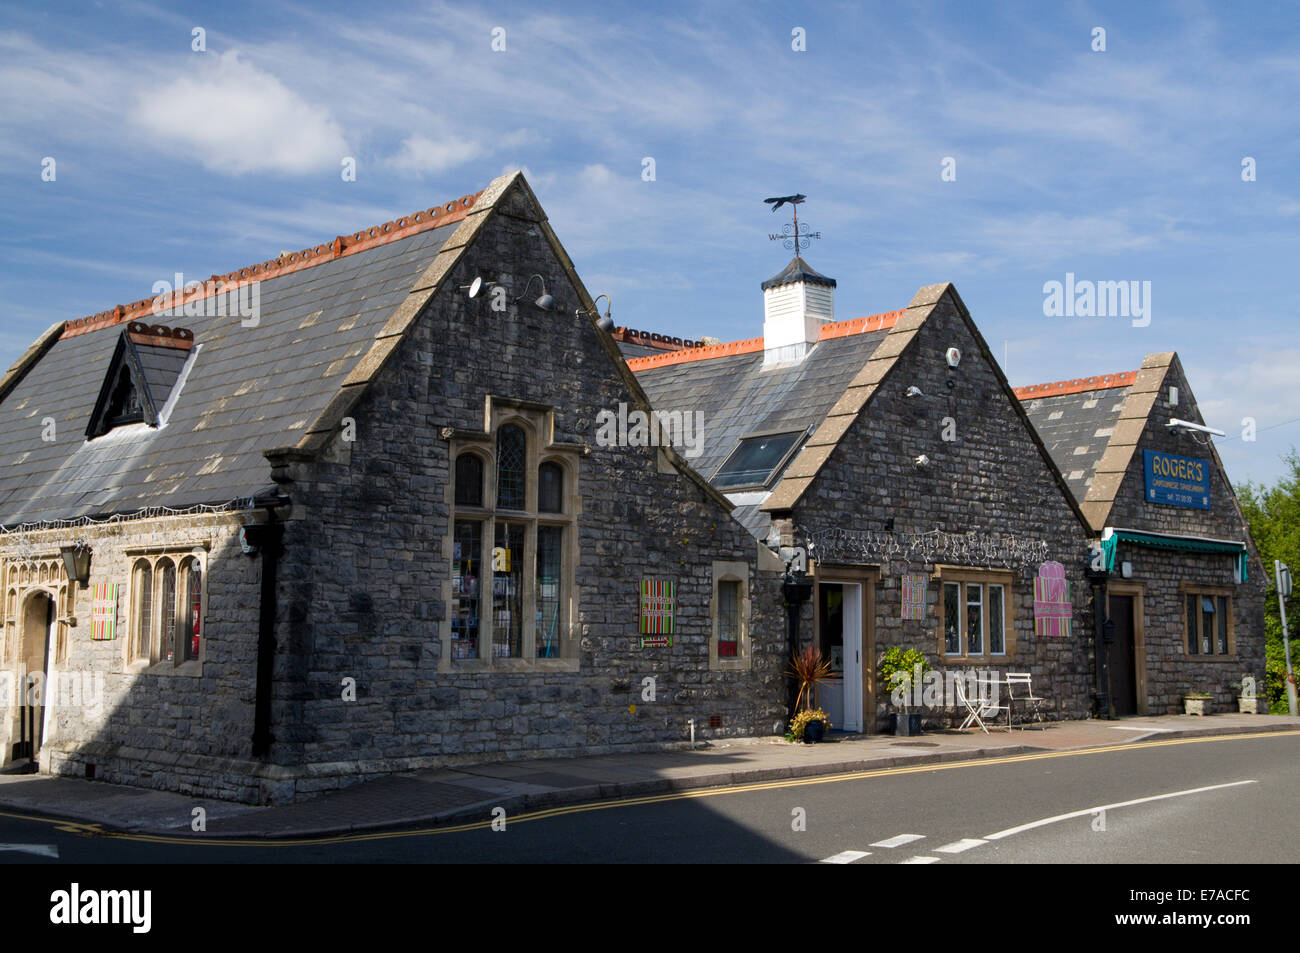 Old building, Town Hall Square, Cowbridge, Vale of Glamorgan, South Wales, UK. Stock Photo